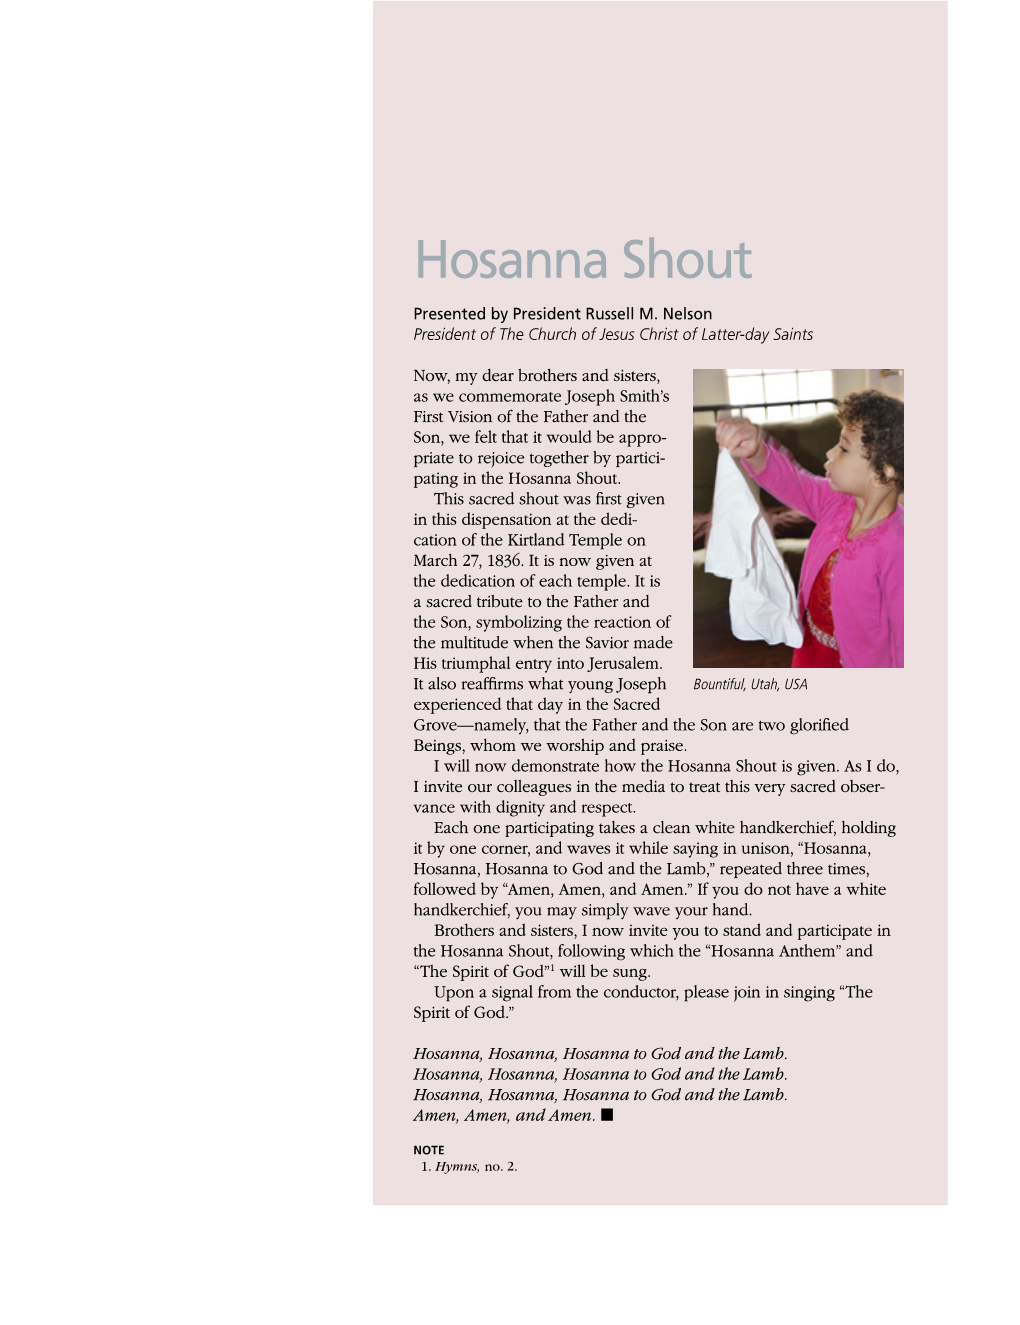 Hosanna Shout Presented by President Russell M